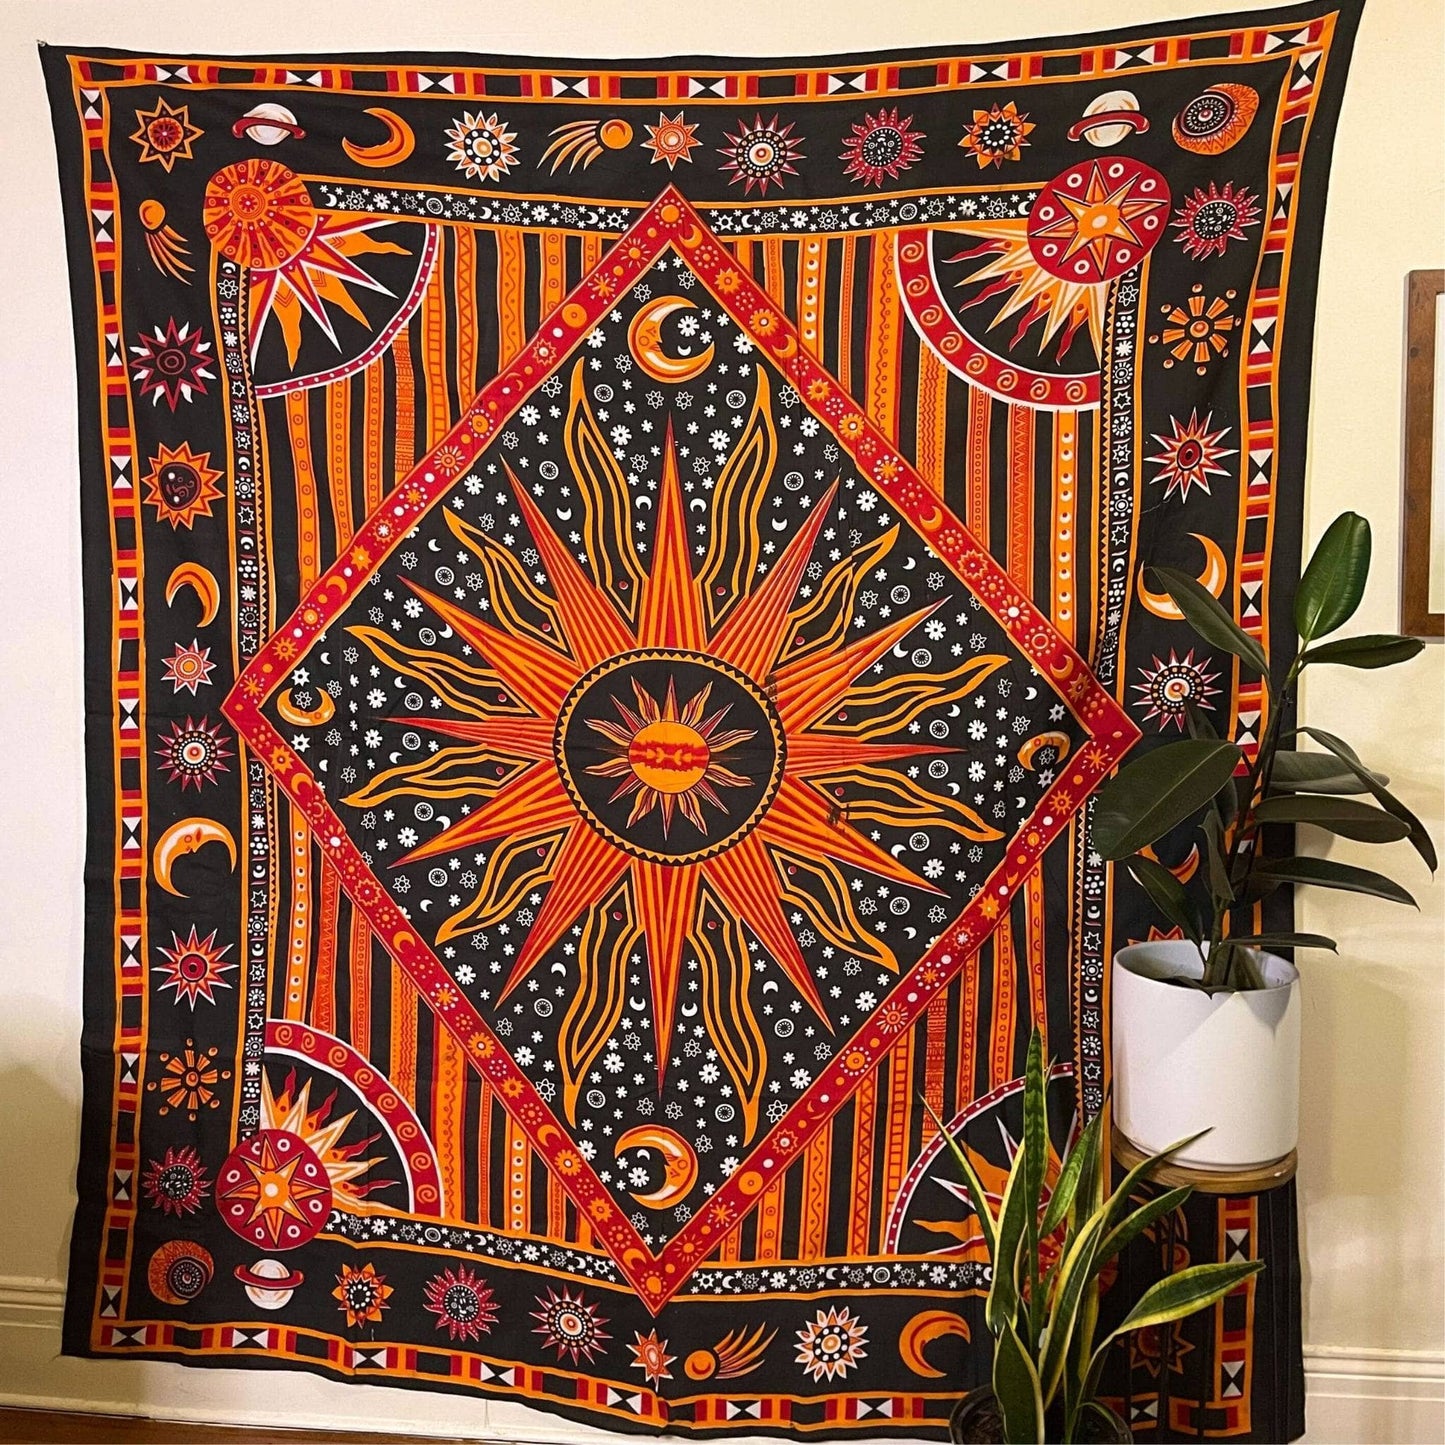 The Tapestry Psychedelic Celestial Sun hanging on a cream colored wall. There are plants sitting on the ground in front of it. This tapestry is a black background with bright oranges and reds mixed in, making a sun pattern in the center. There are stars, moons and suns around the edges.